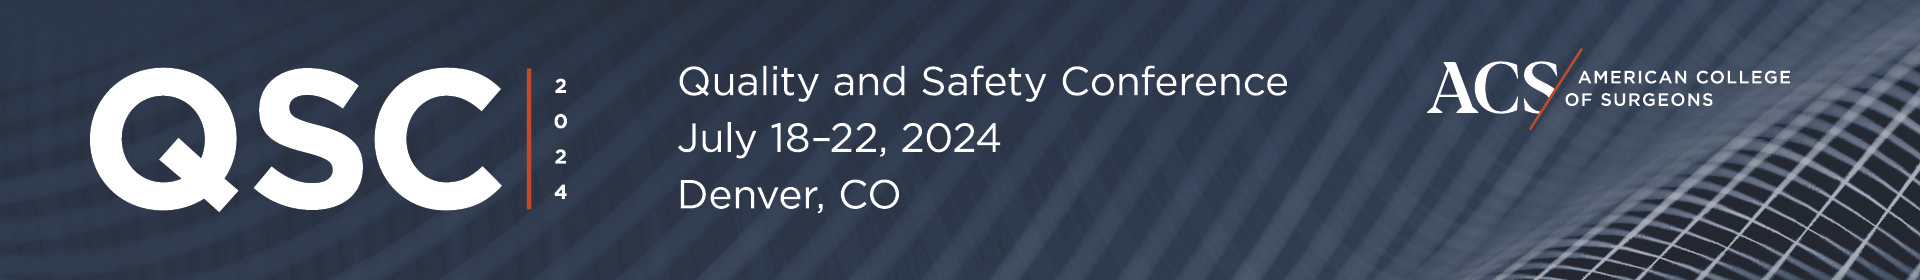 2024 ACS Quality and Safety Conference Event Banner